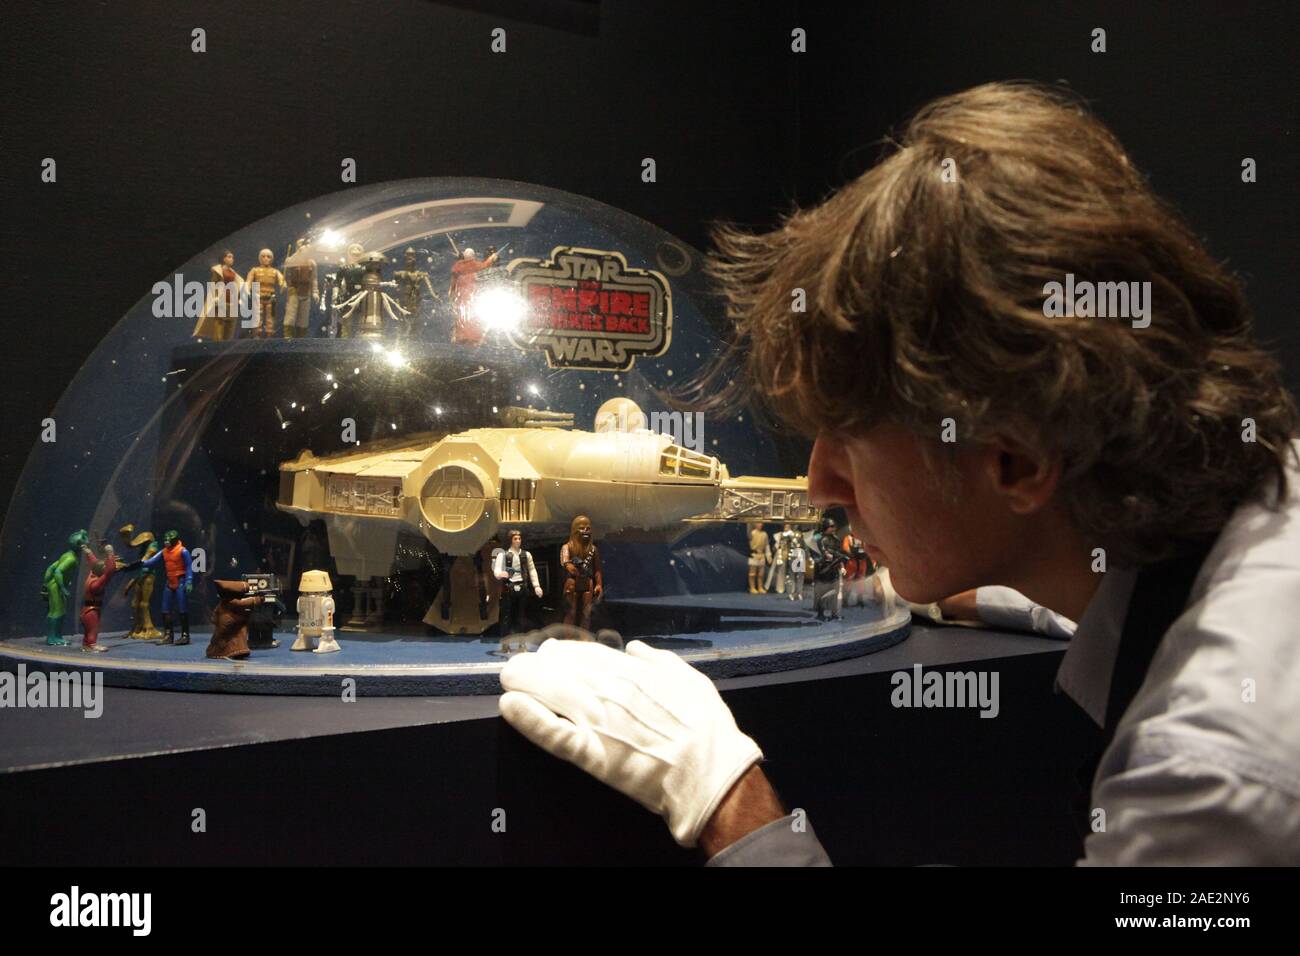 https://c8.alamy.com/comp/2AE2NY6/sothebys-gallery-assistant-matthew-floris-inspects-a-rare-toy-shop-display-of-the-empire-strikes-back-toy-figures-and-a-millennium-falcon-from-1980-ahead-of-the-star-wars-collectibles-online-only-sale-at-the-london-auction-house-2AE2NY6.jpg